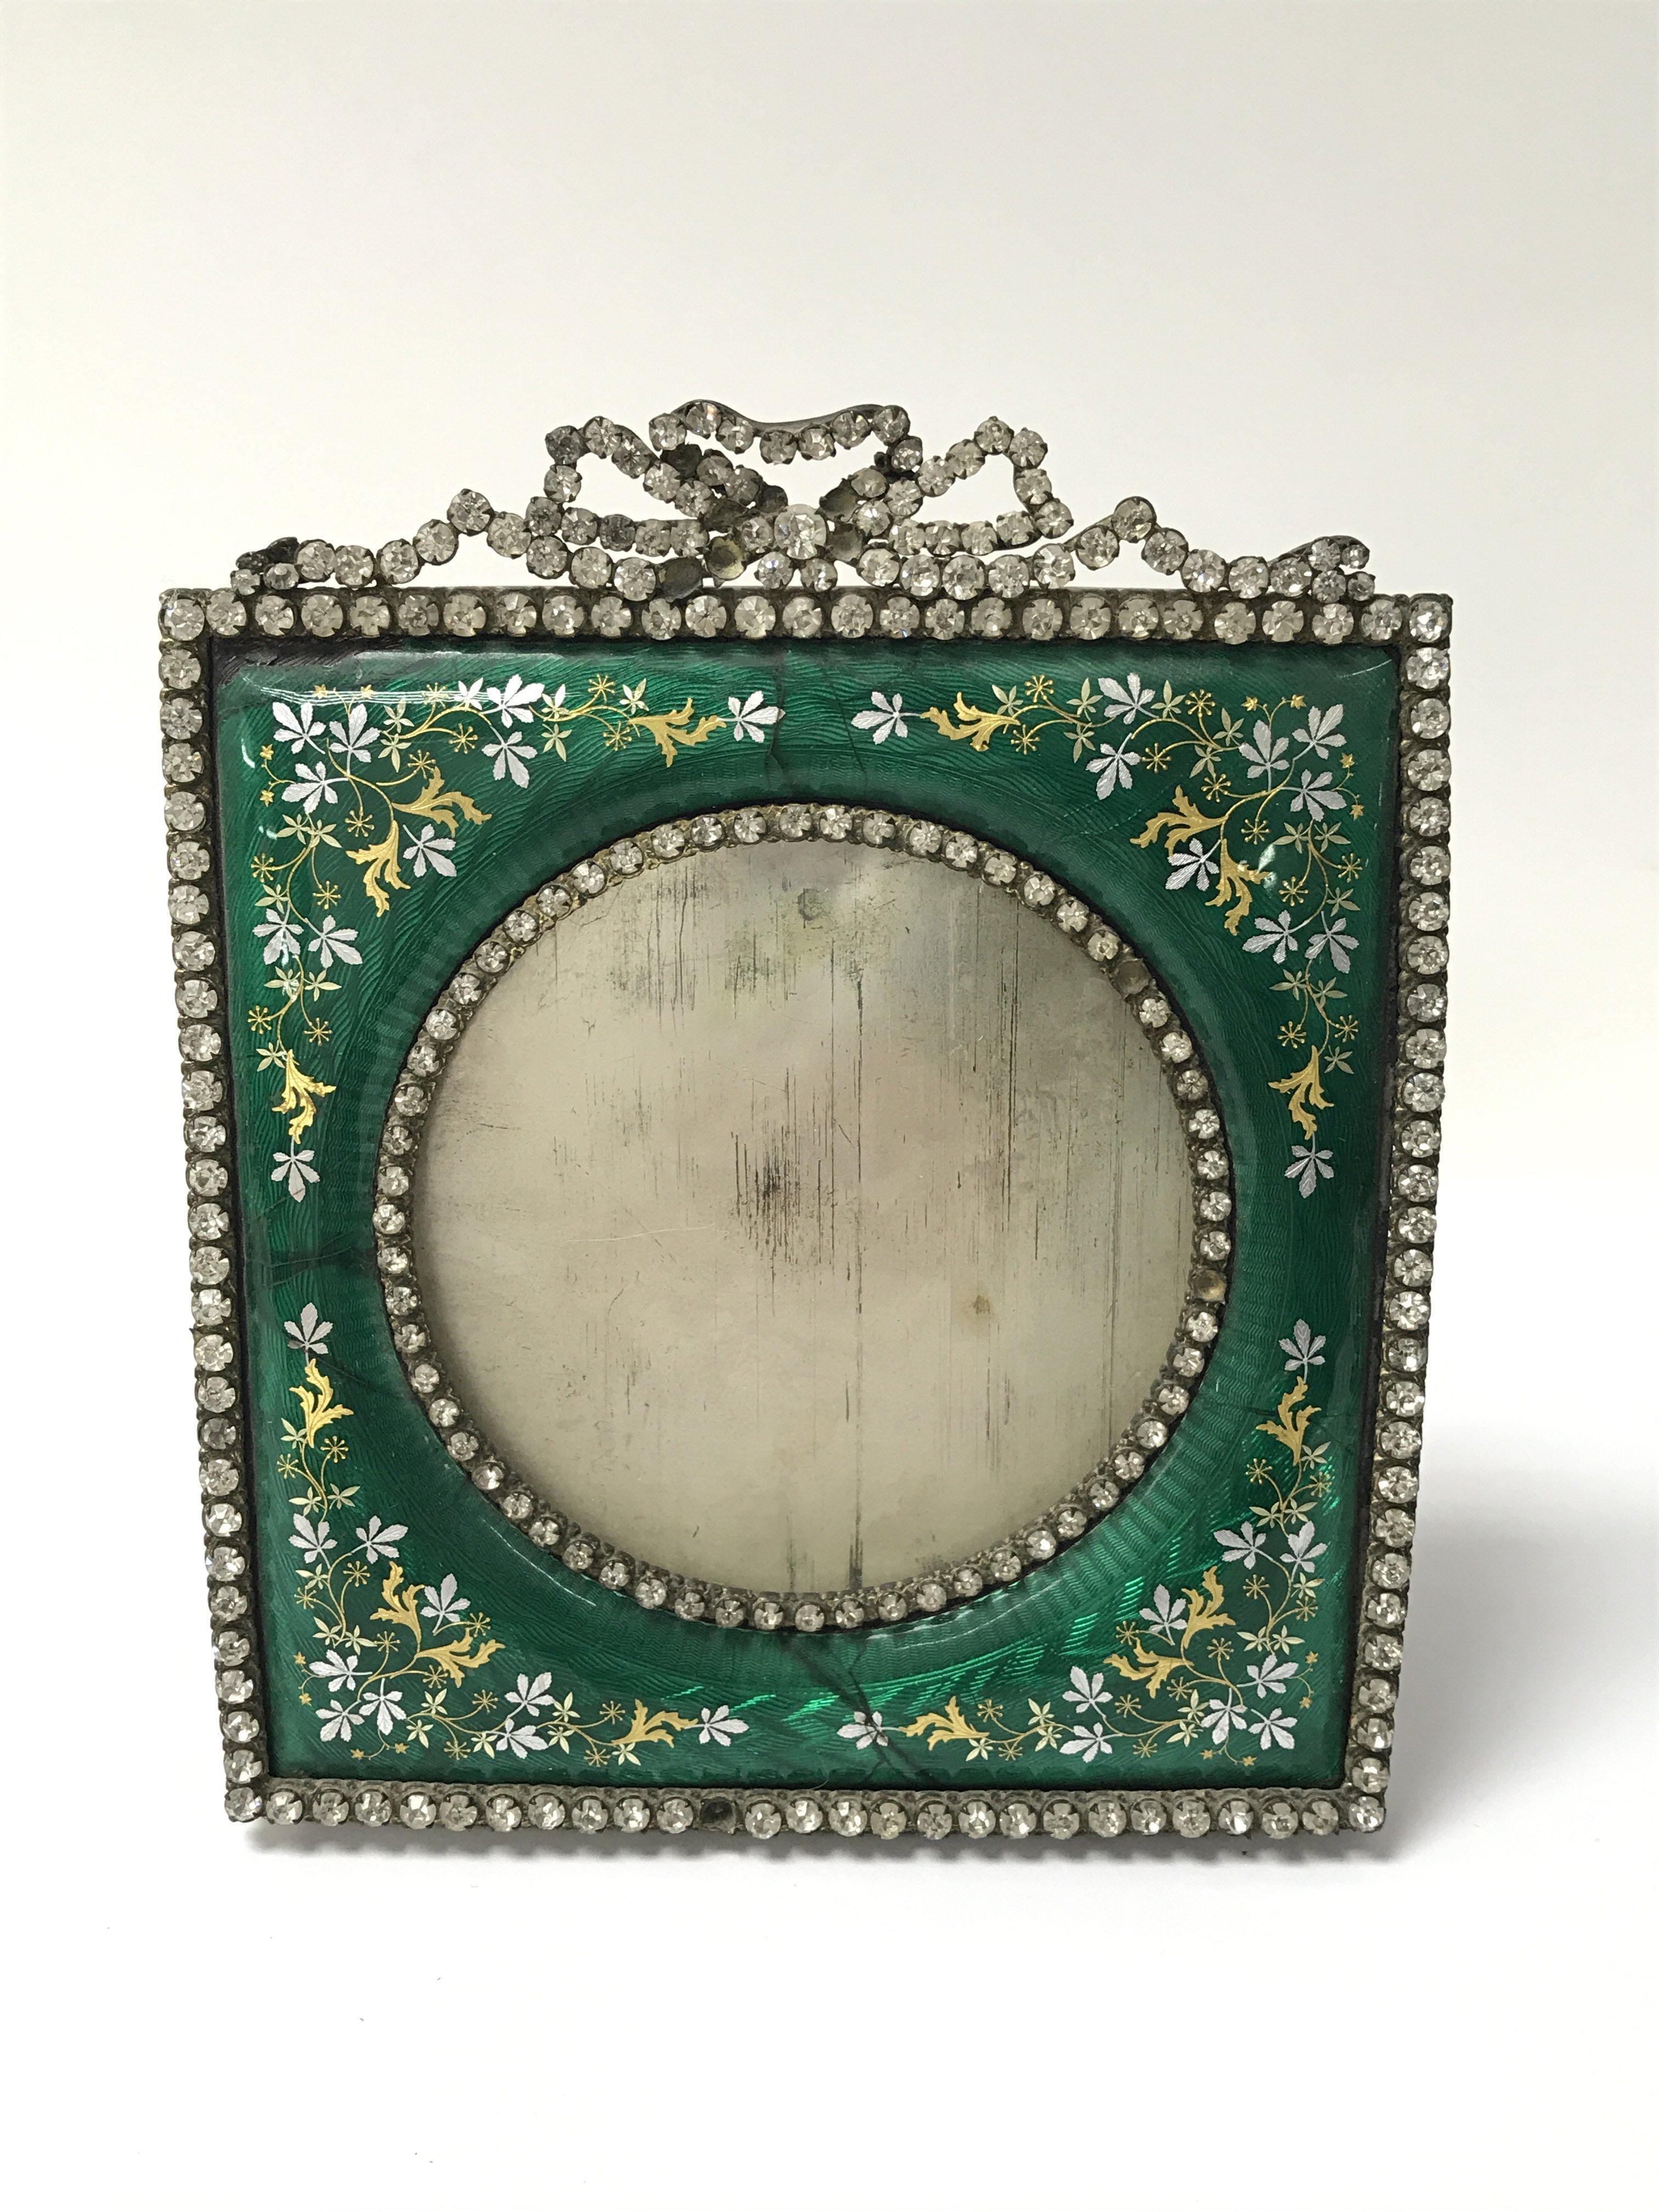 A green enamel photo frame decorate with folate de